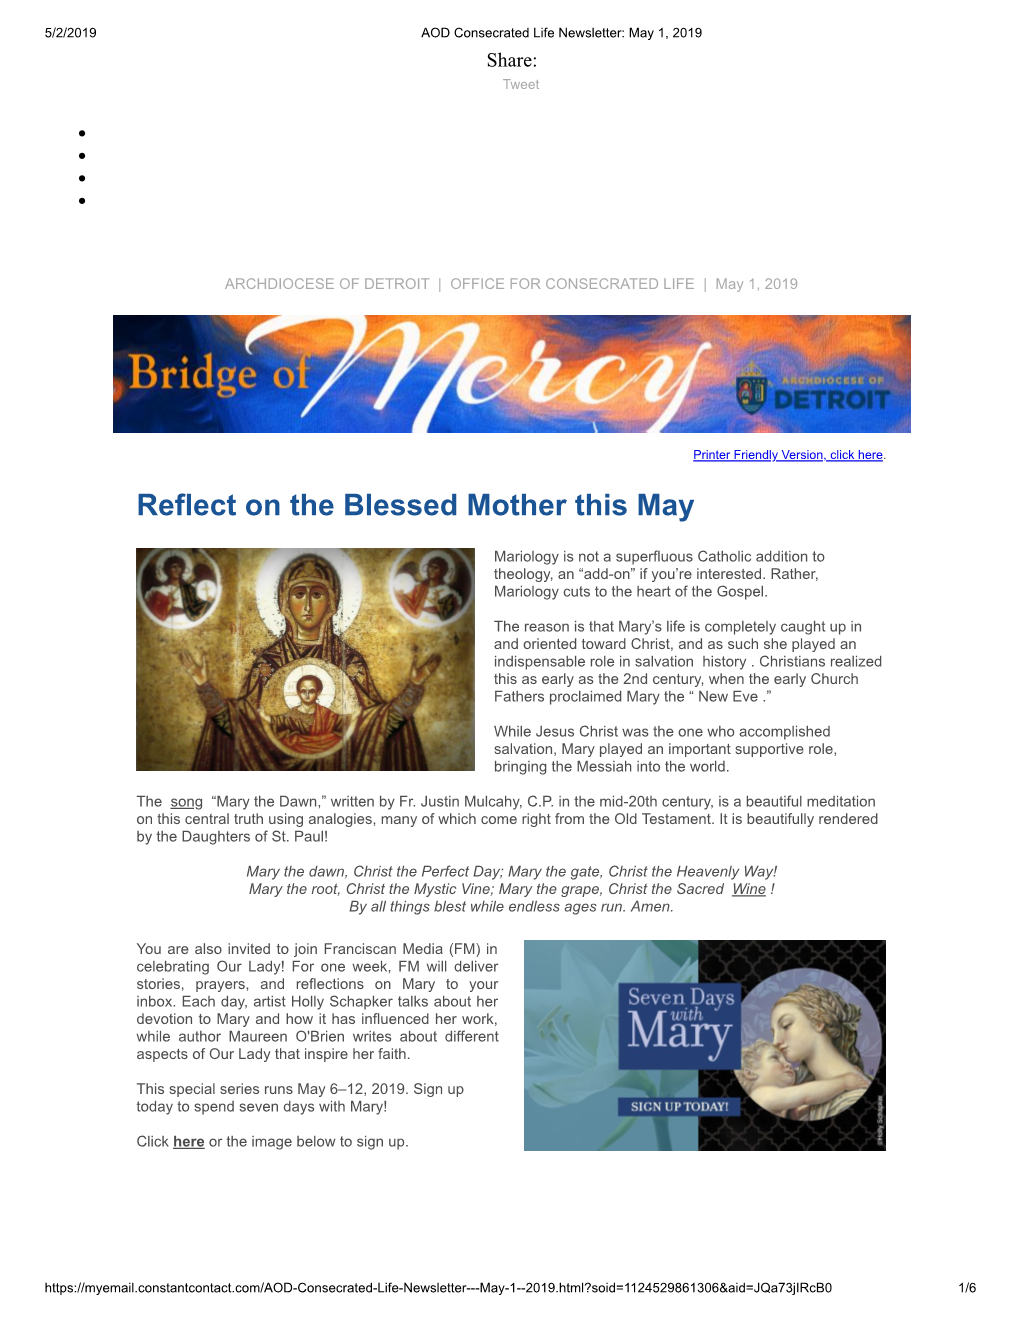 Reflect on the Blessed Mother This May